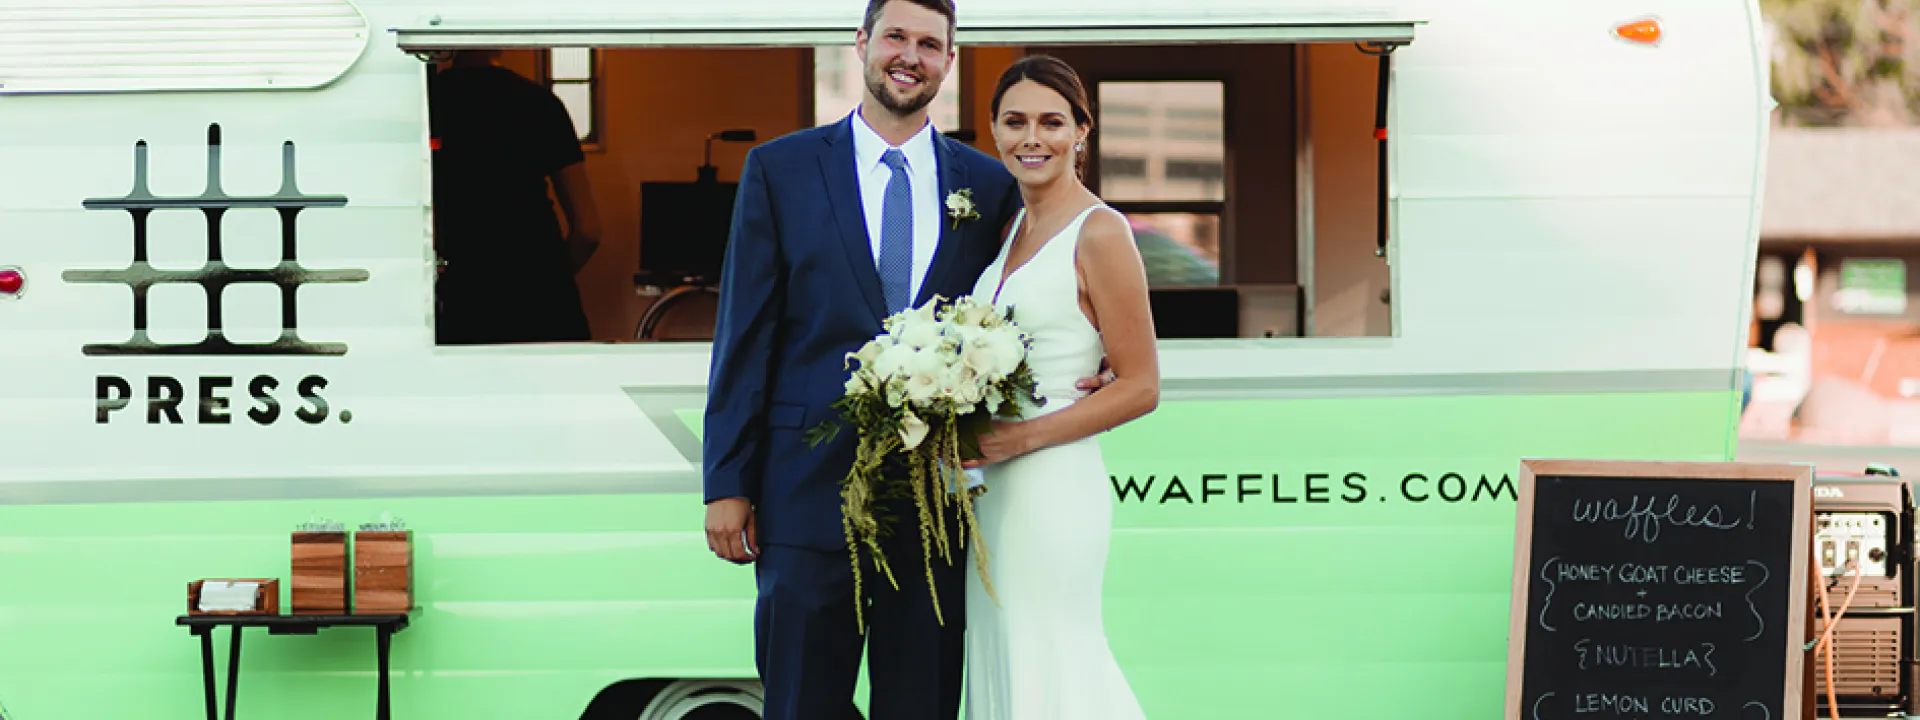 A couple stands in front of Belgian Liege Waffles, part of a new wedding trend: food stations.